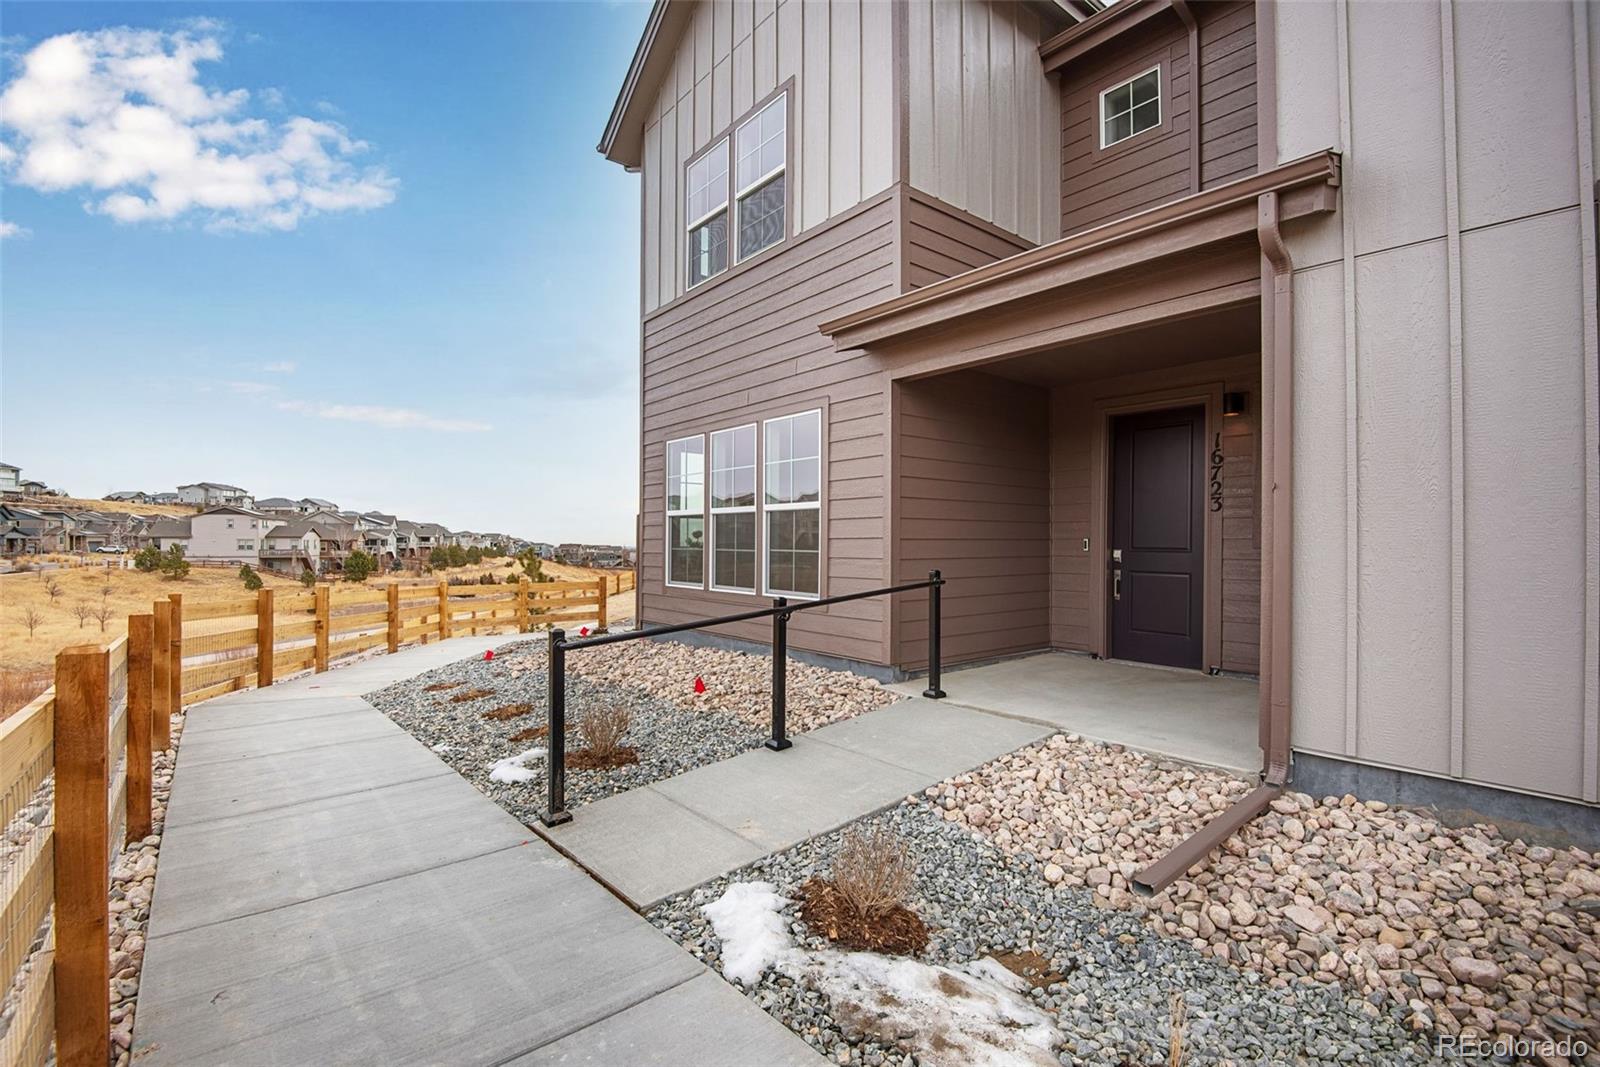 16723 W 93rd Place, arvada MLS: 8339525 Beds: 3 Baths: 3 Price: $594,900